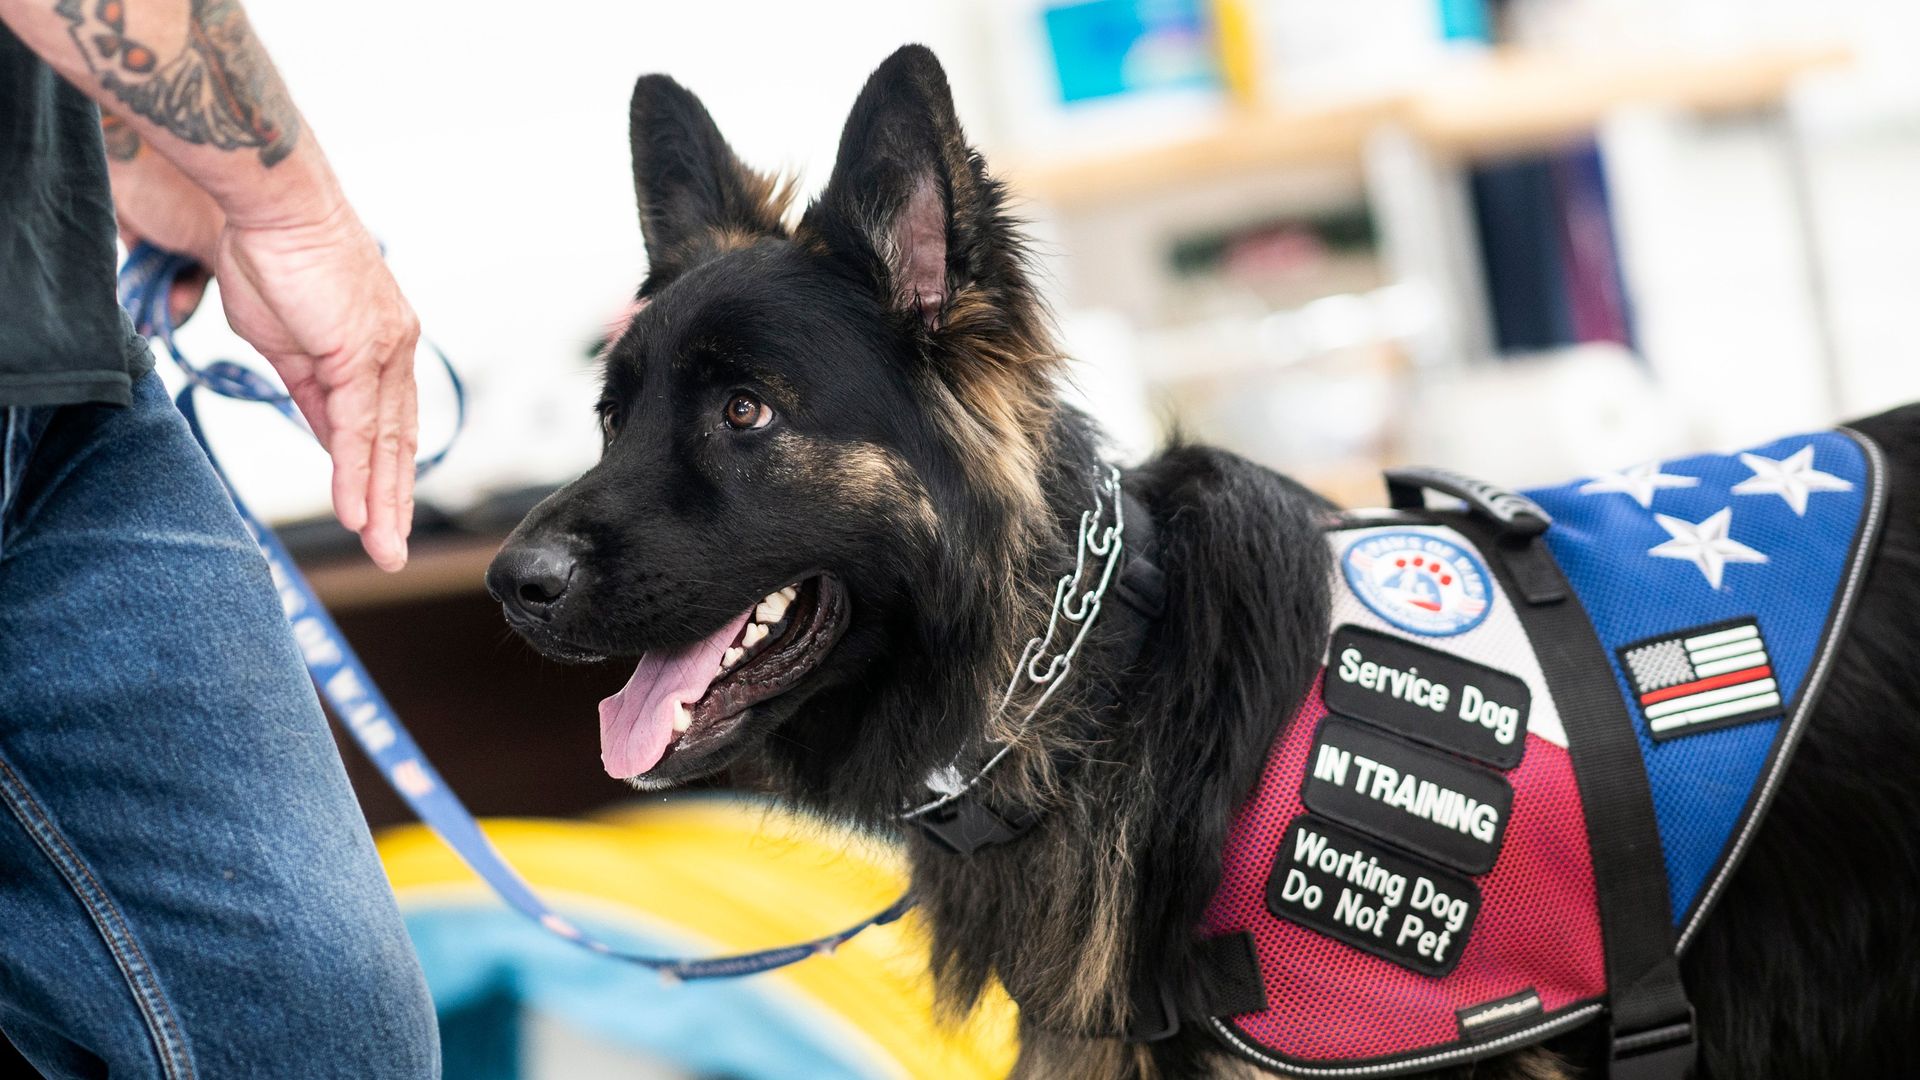 A service dog waits for training at the Paws of War office in Nesconset, Long Island, New York on June 10, 2019.